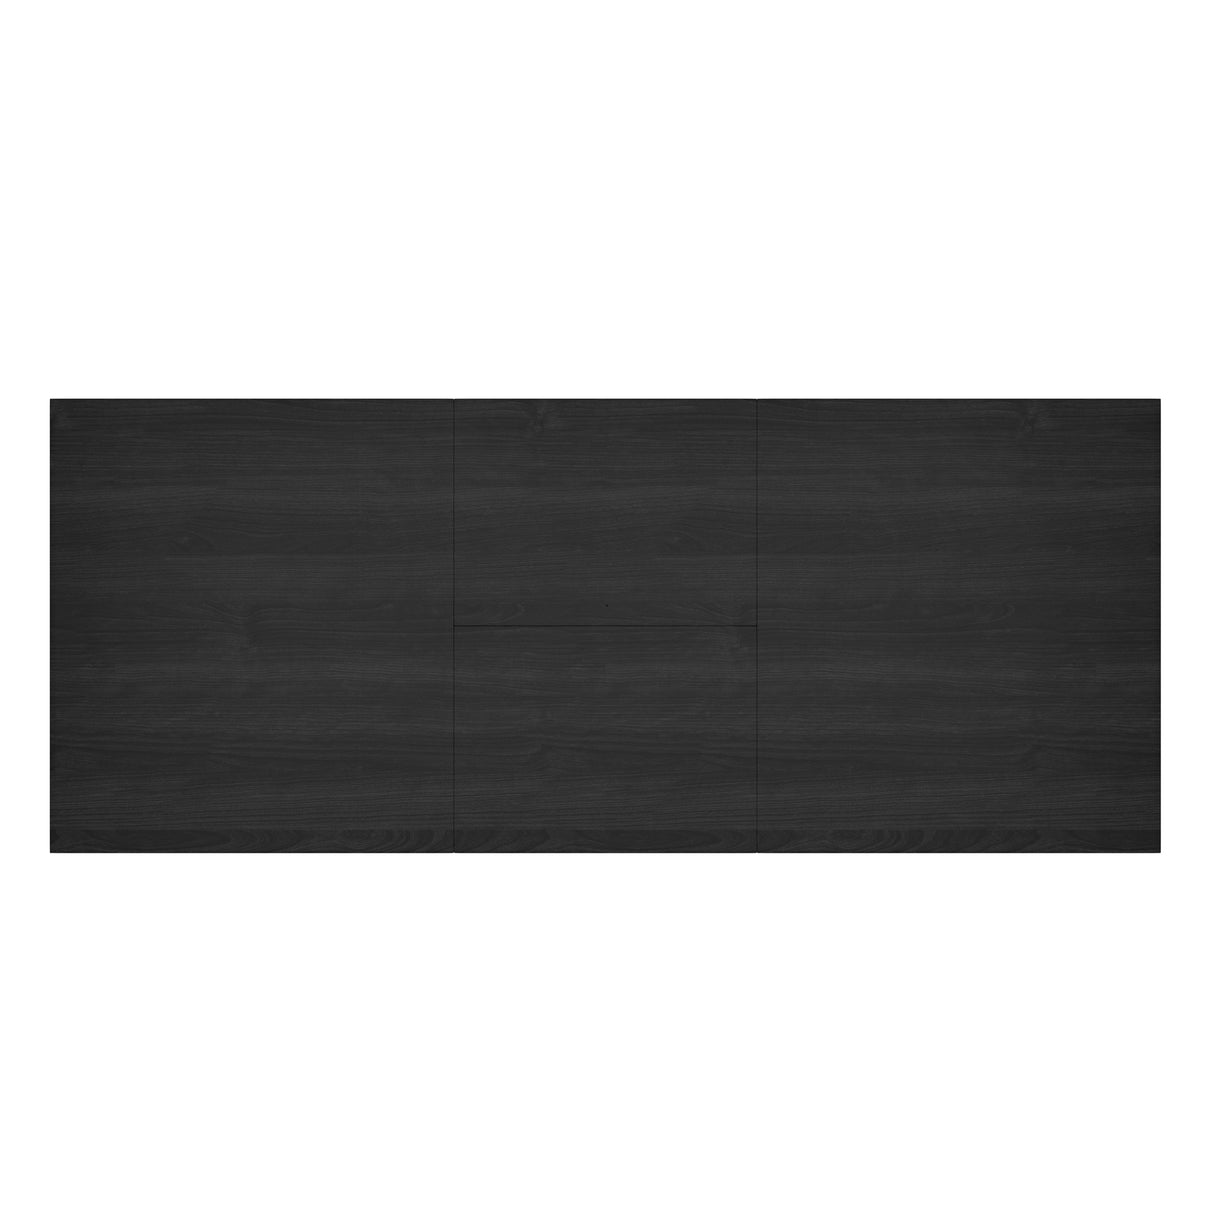 Eclipse Extension Dining Table Black